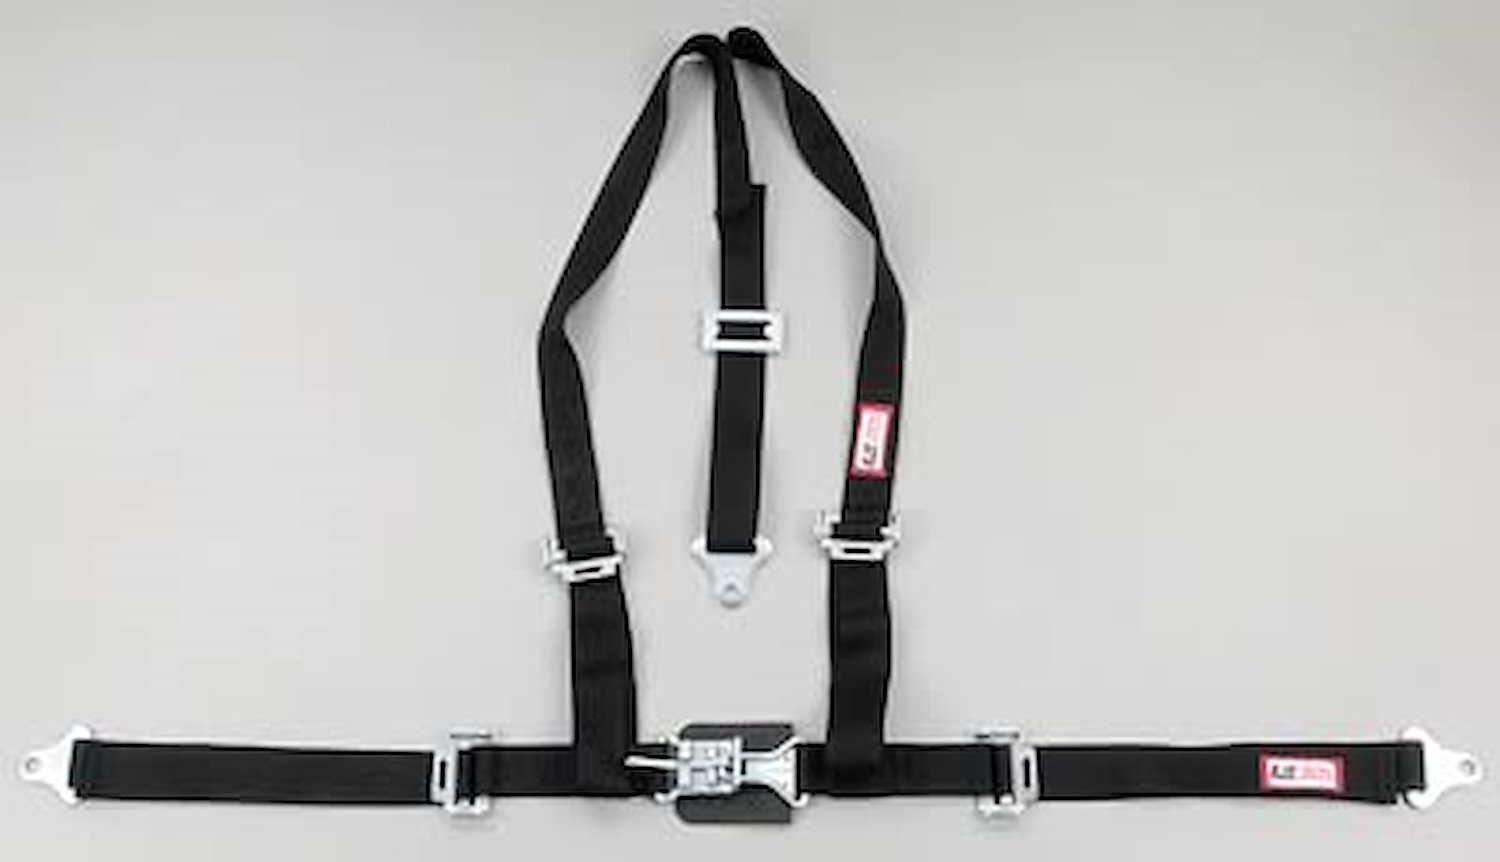 NON-SFI L&L HARNESS 2 PULL UP Lap Belt SNAP SEWN IN 2 S.H. Y FLOOR Mount w/STERNUM STRAP WRAP/SNAP KHAKI